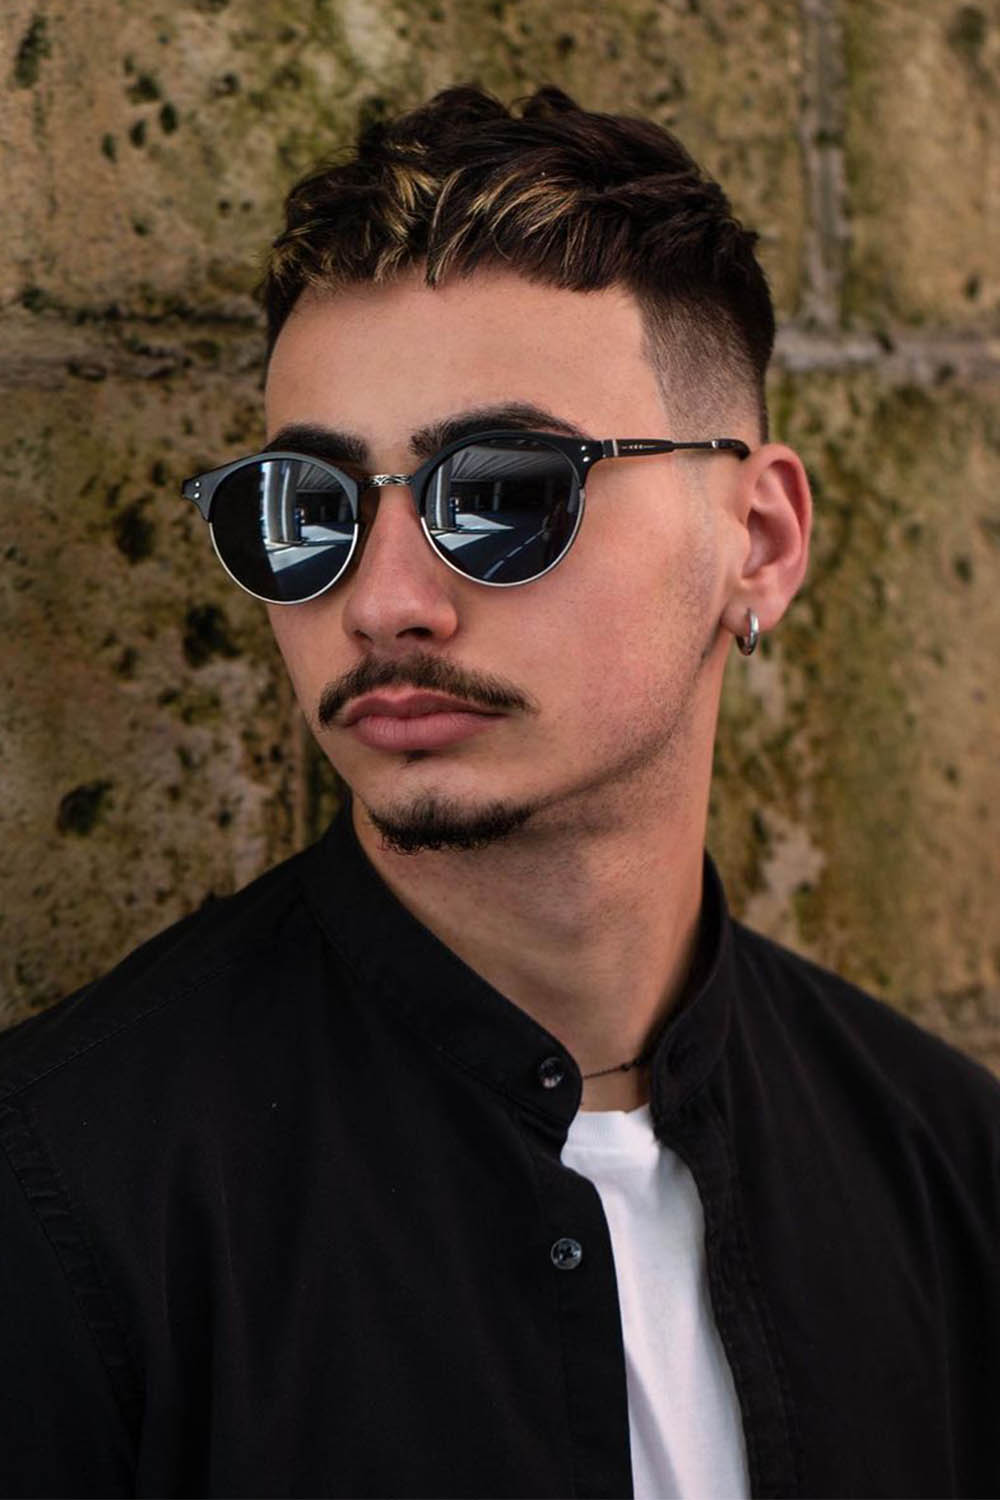 14 Trendy Ways To Upgrade High and Tight Cut